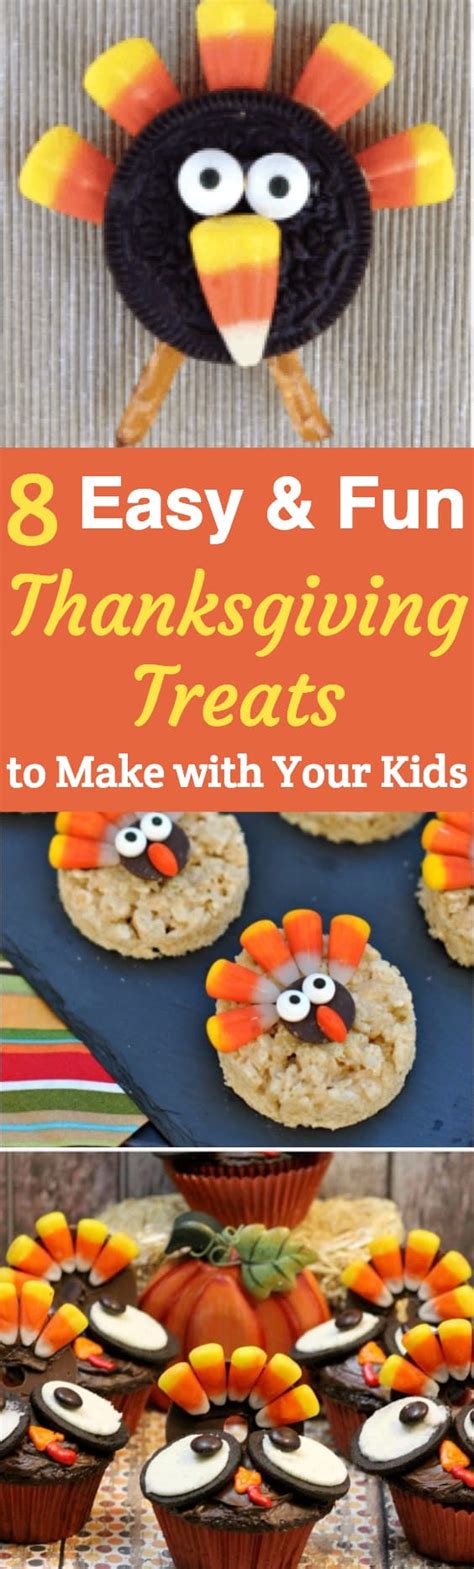 These creative thanksgiving day dessert ideas go way beyond the traditional slice of pie. Thanksgiving Desserts Kids Love - 8 Fun & Easy Kid-Approved Desserts